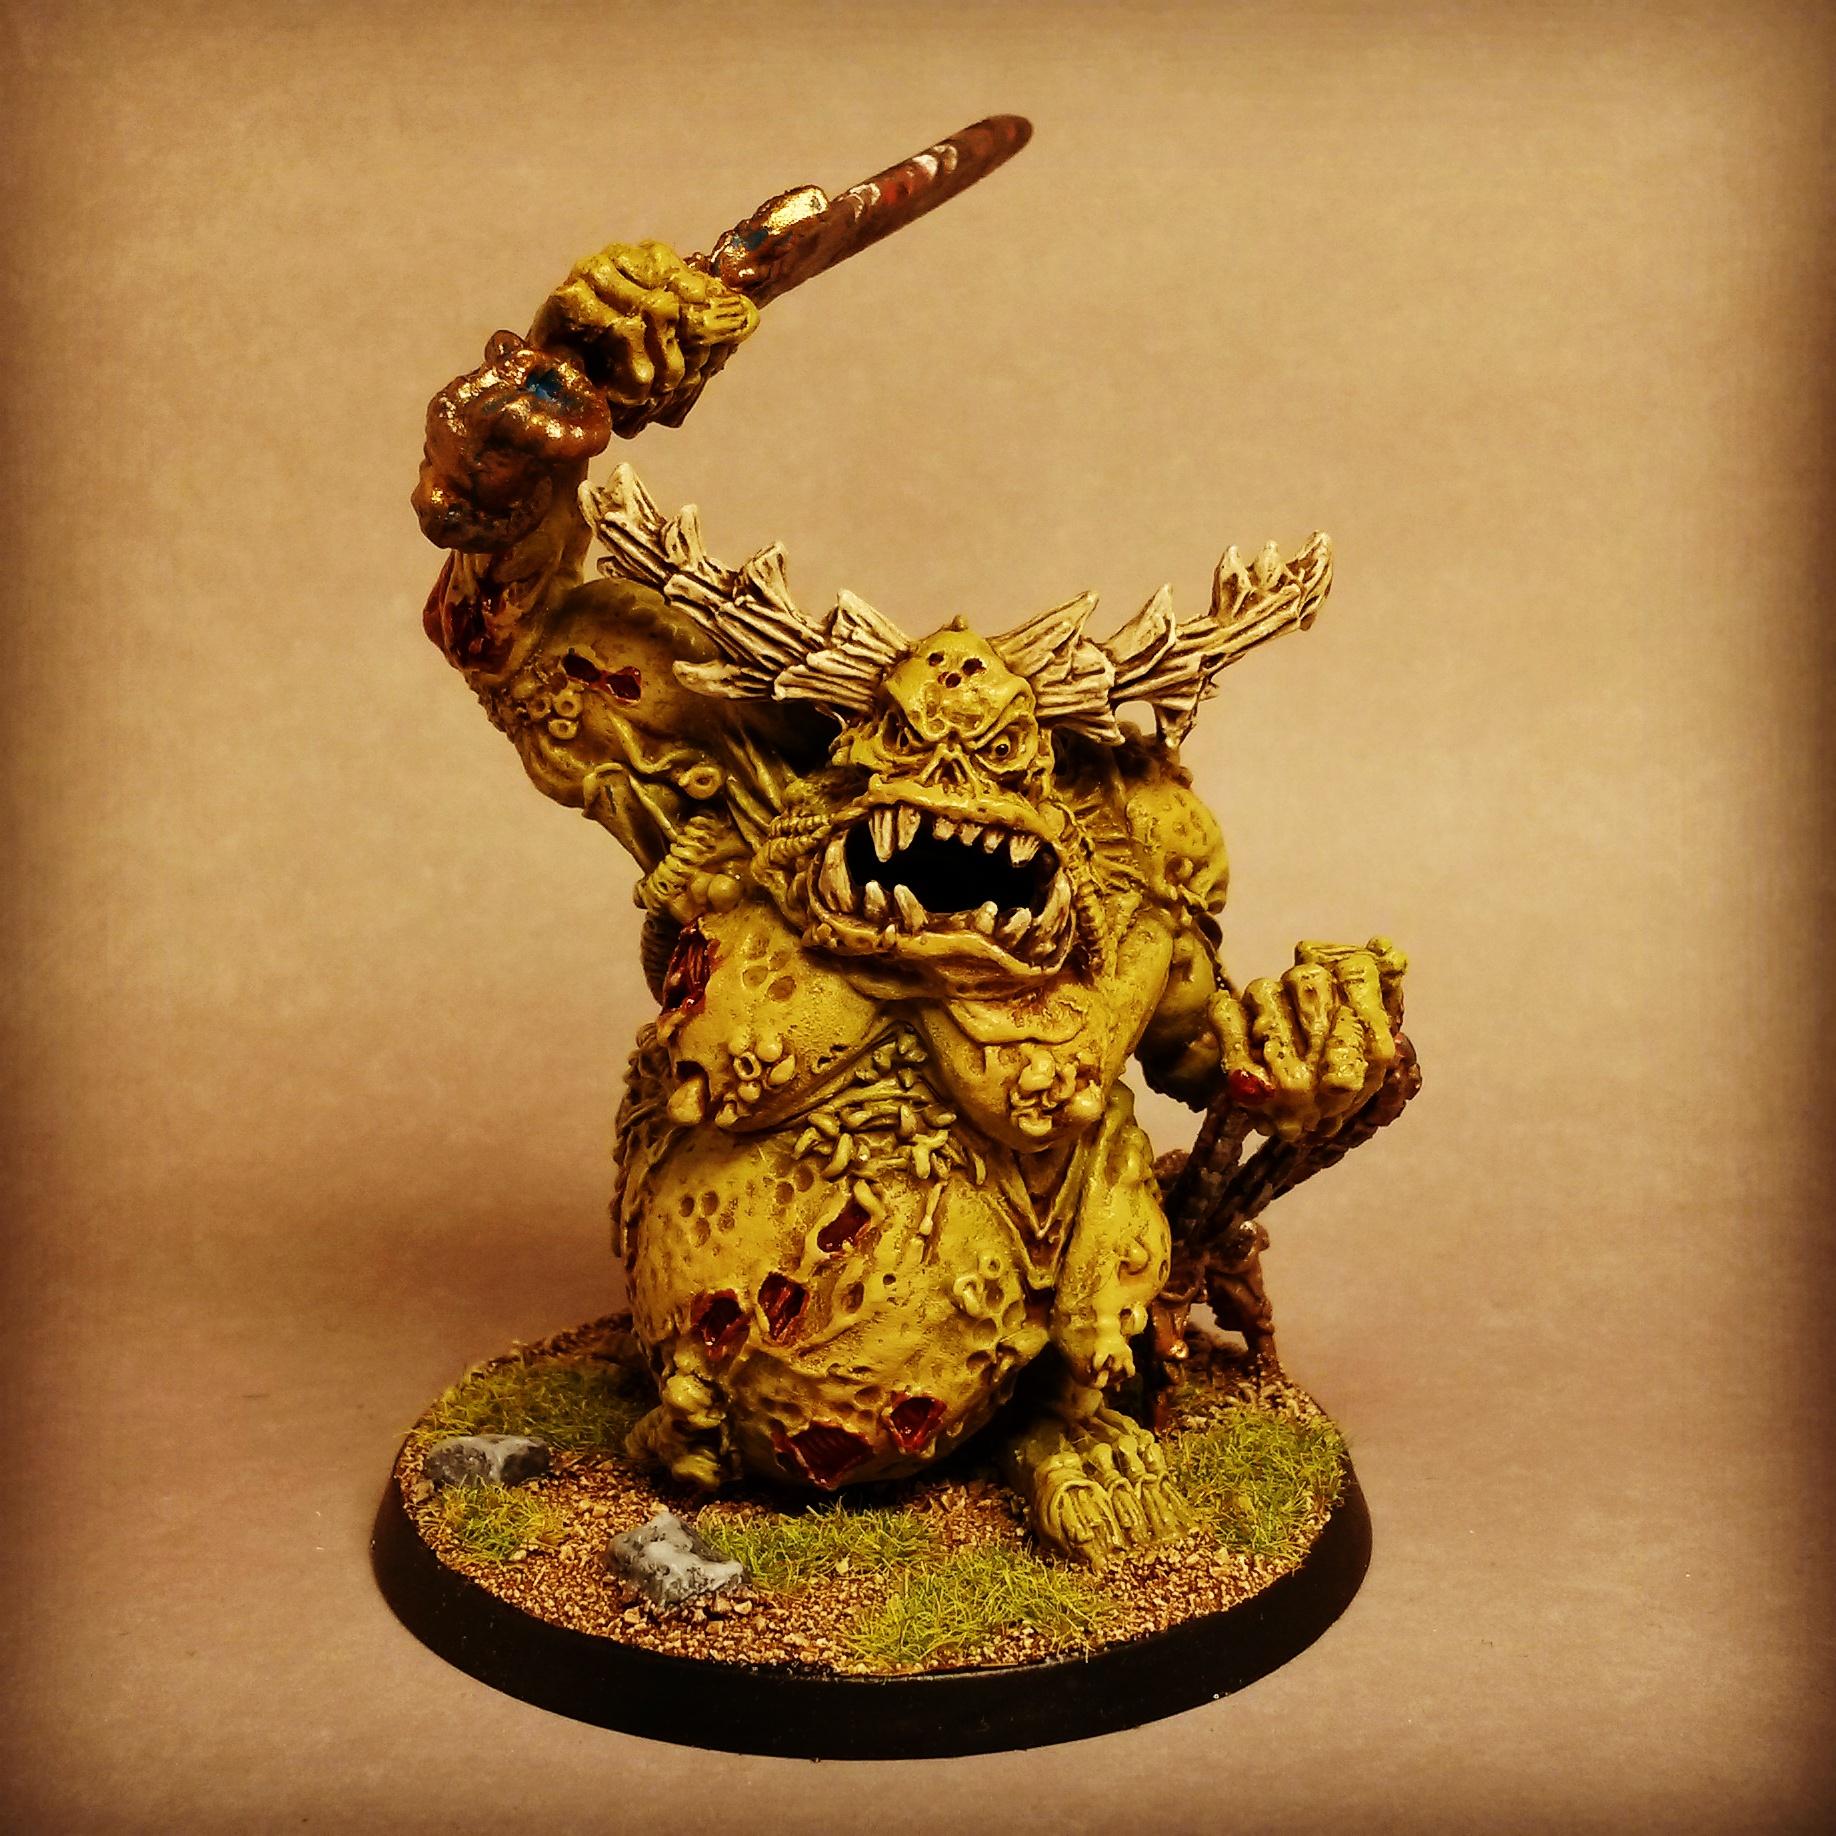 Age Of Sigmar, Chaos Daemons, Great Unclean One, Greater Daemon Of Nurgle, Nurgle, Warhammer 40,000